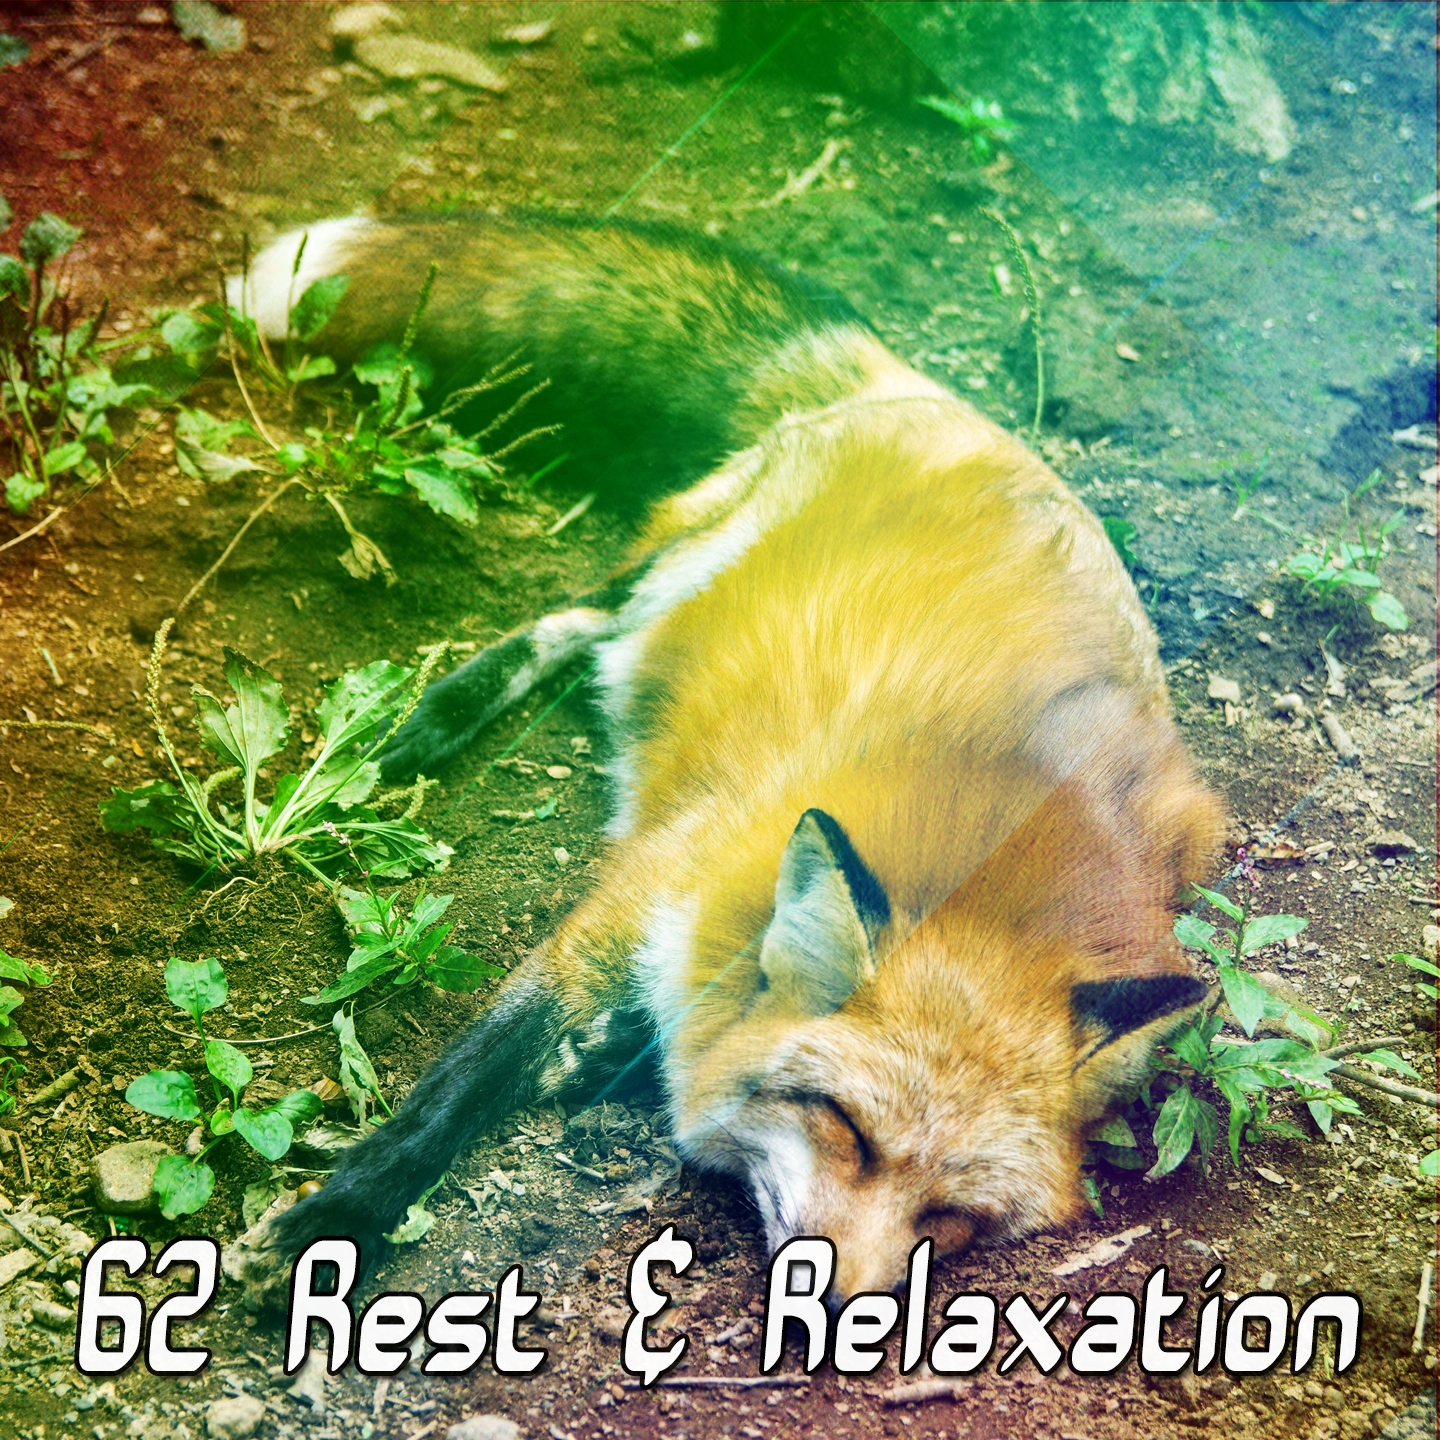 62 Rest & Relaxation